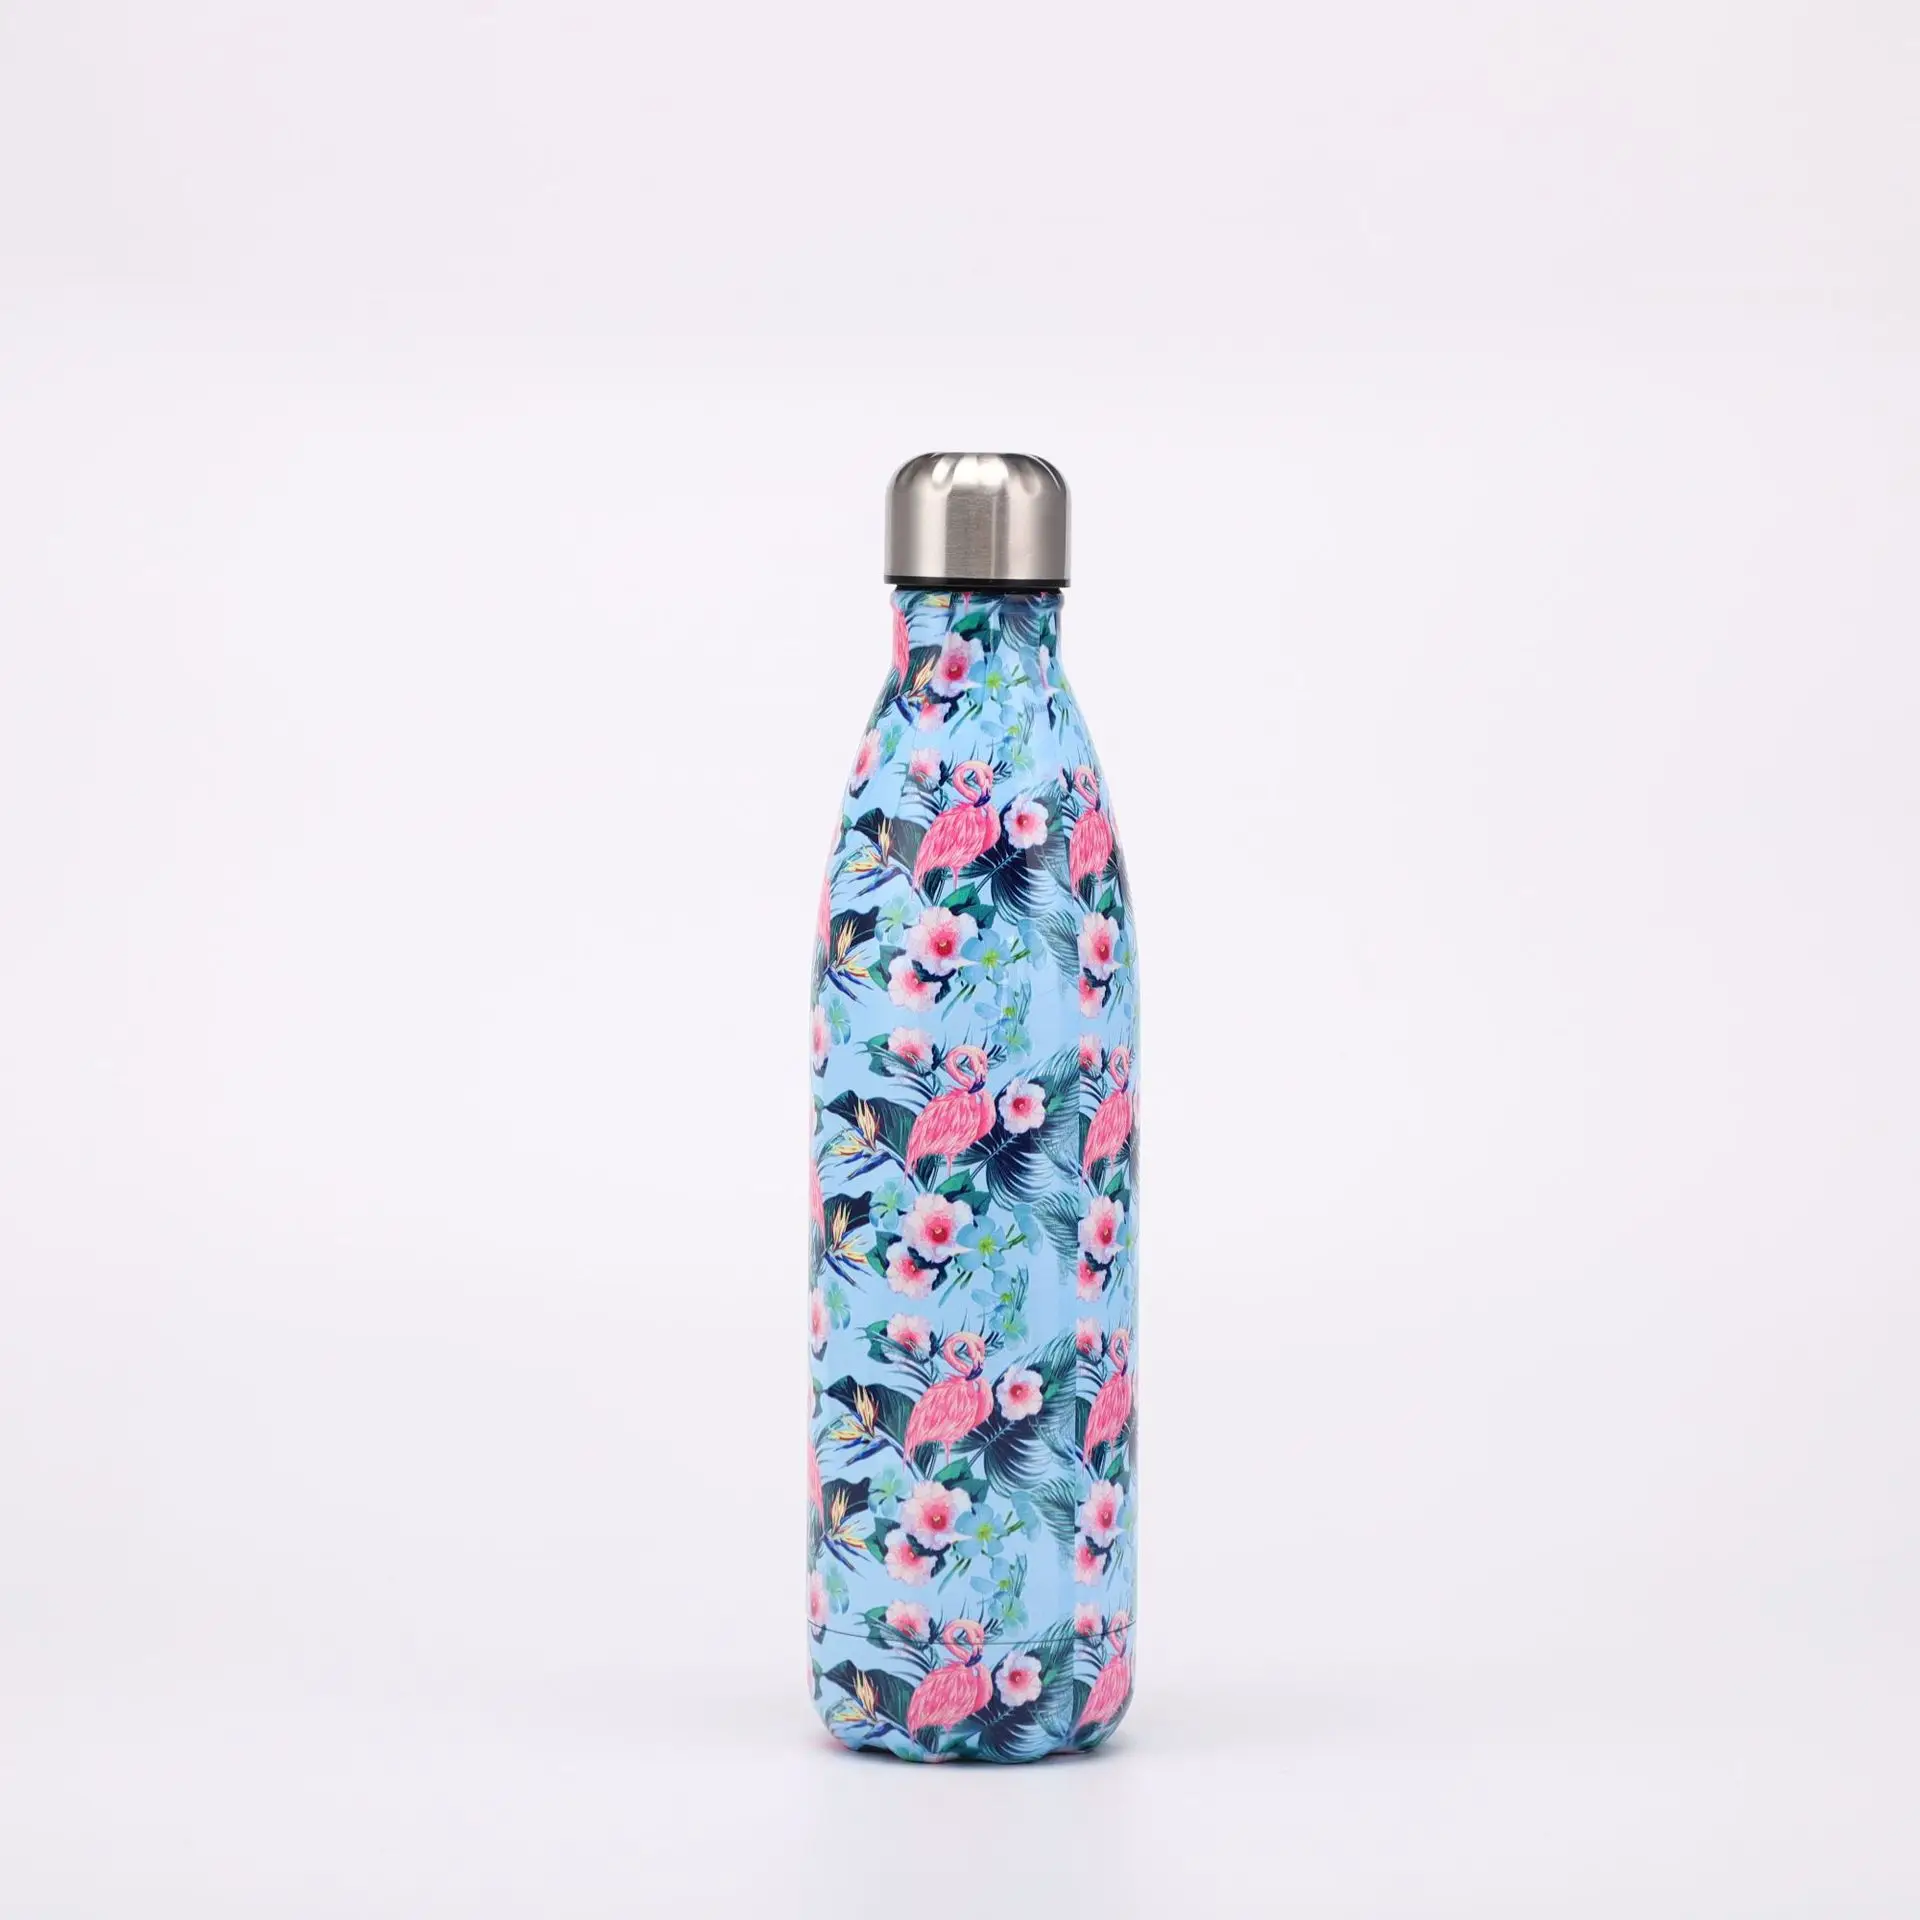 HYDRATE Super Insulated Stainless Steel Water Bottle - 500ml - Tropical  Breeze - Bpa Free Metal Water Bottle, Drinking Hot Water Thermos, Reusable